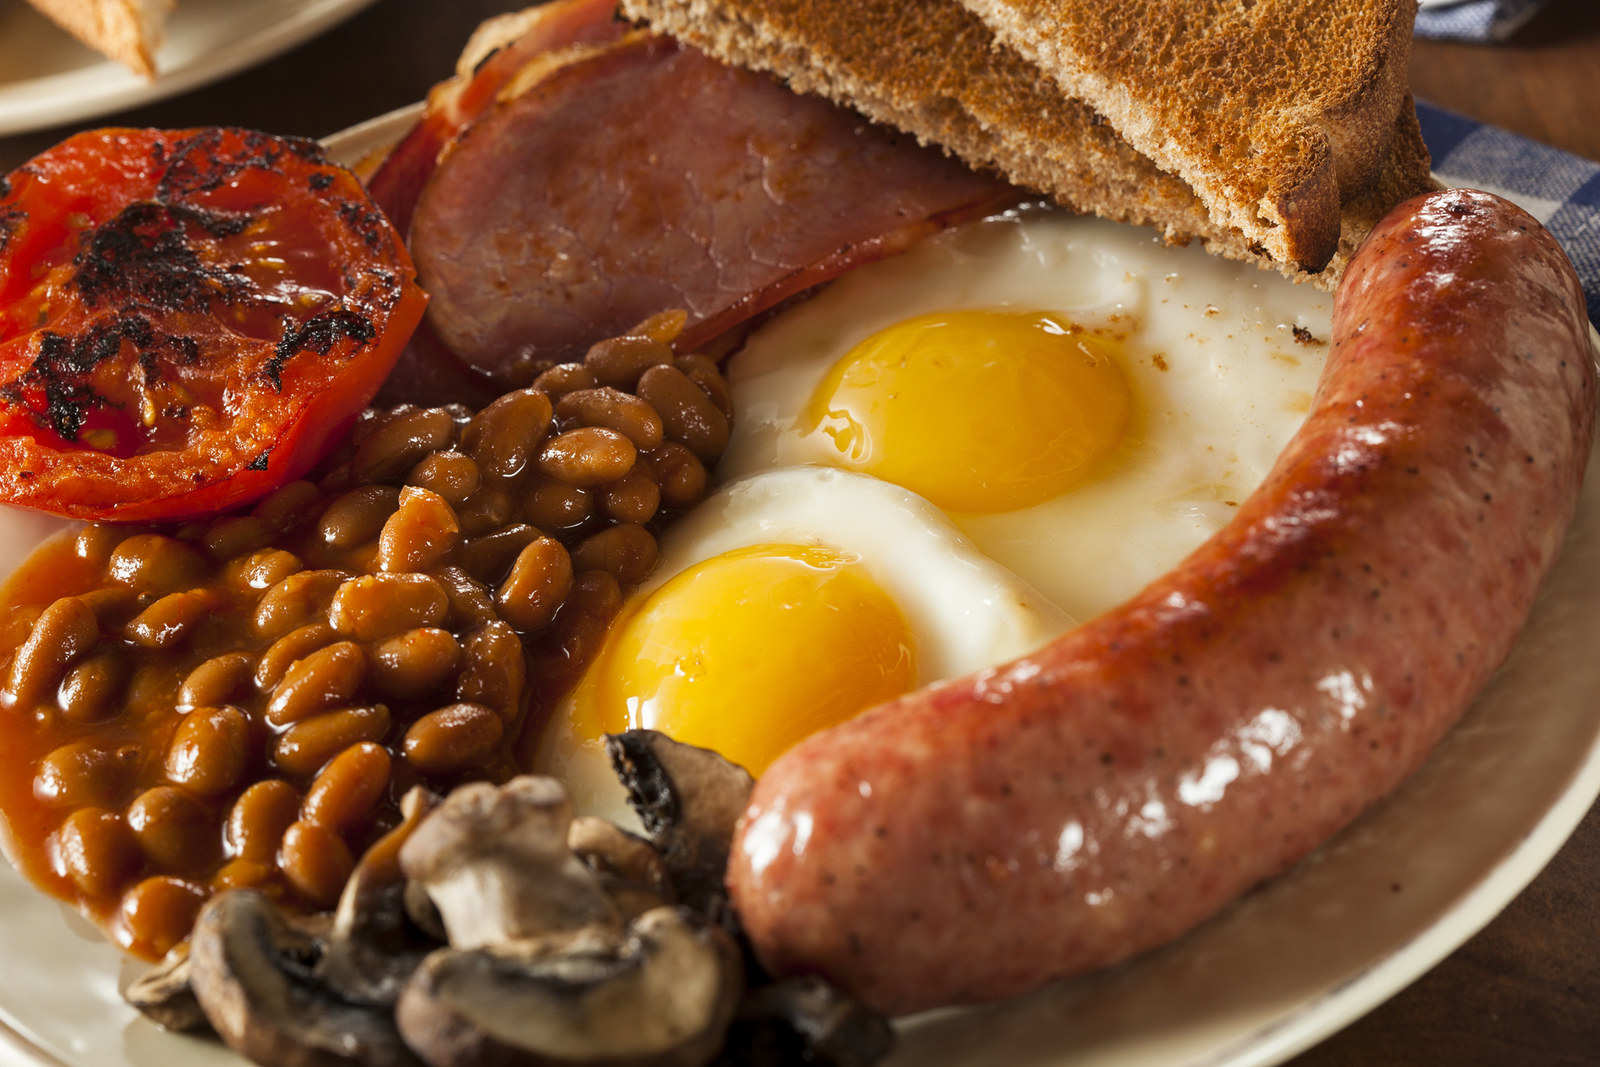 Similarly, the full English breakfast isn't so much a particular meal ...